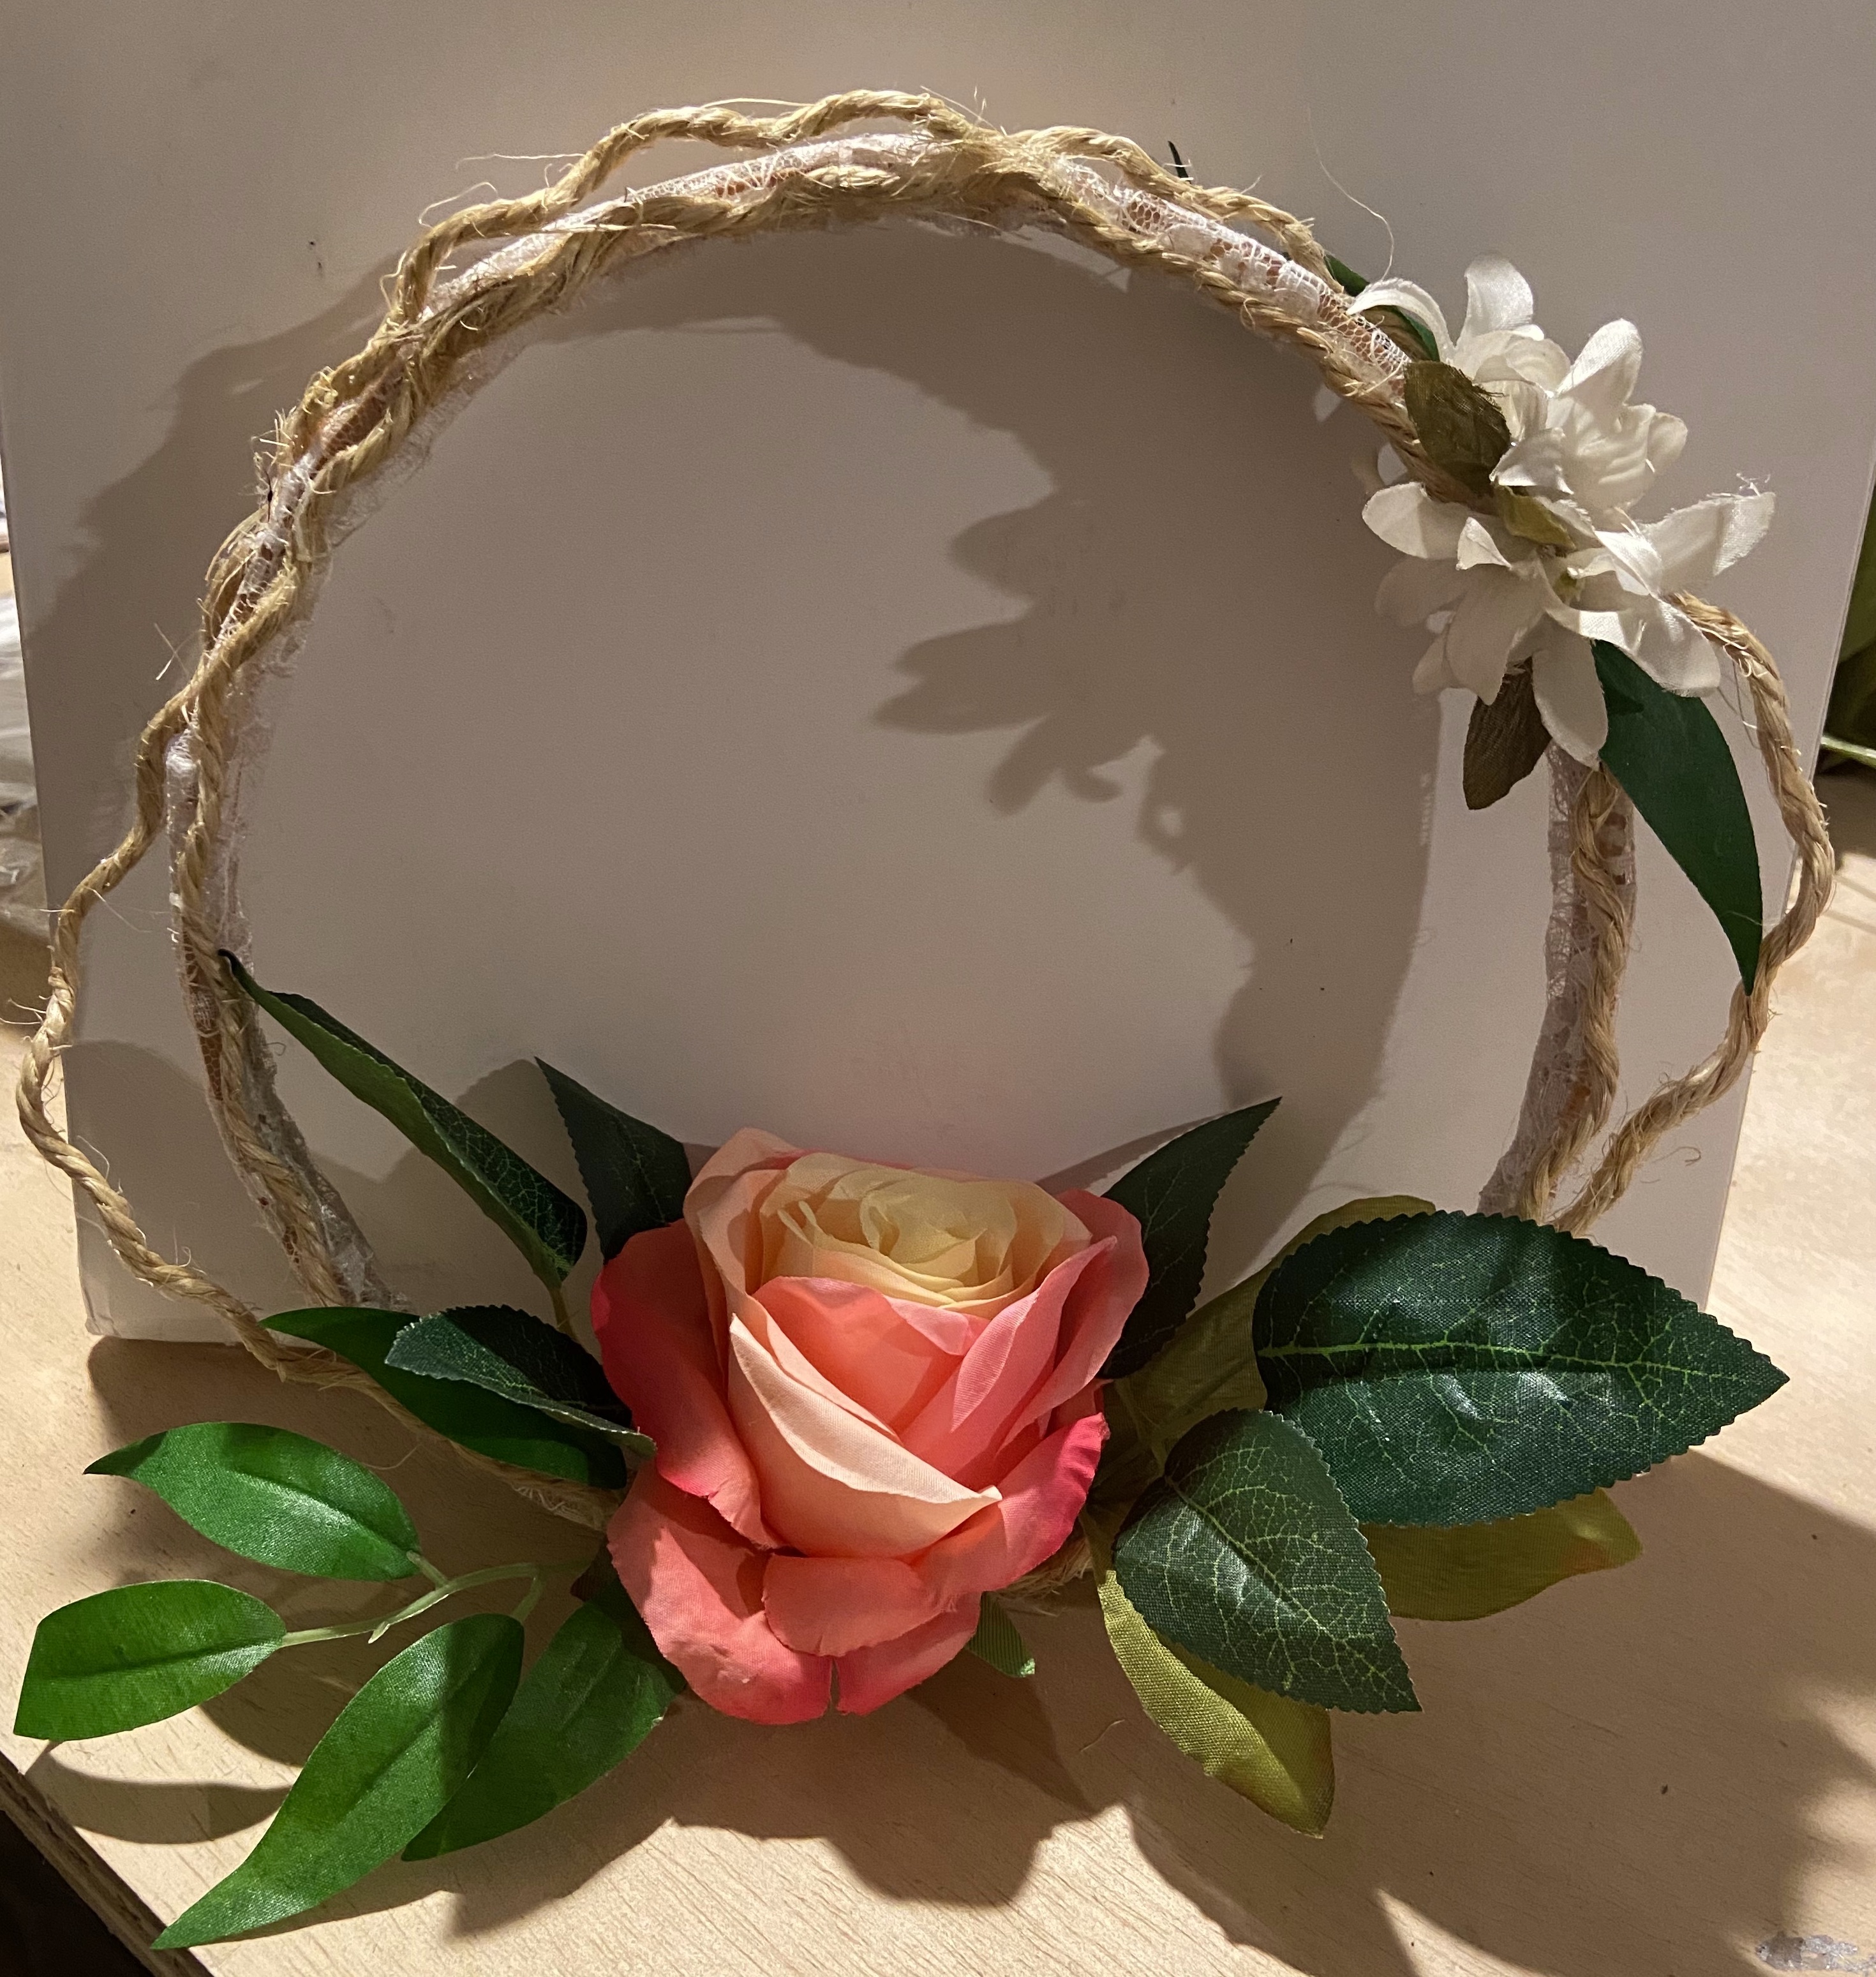 Make this DIY Flower Hoop from this simple step by step tutorial.  It's something unique for your flower girl, bridesmaids or simply gorgeous wedding decor.